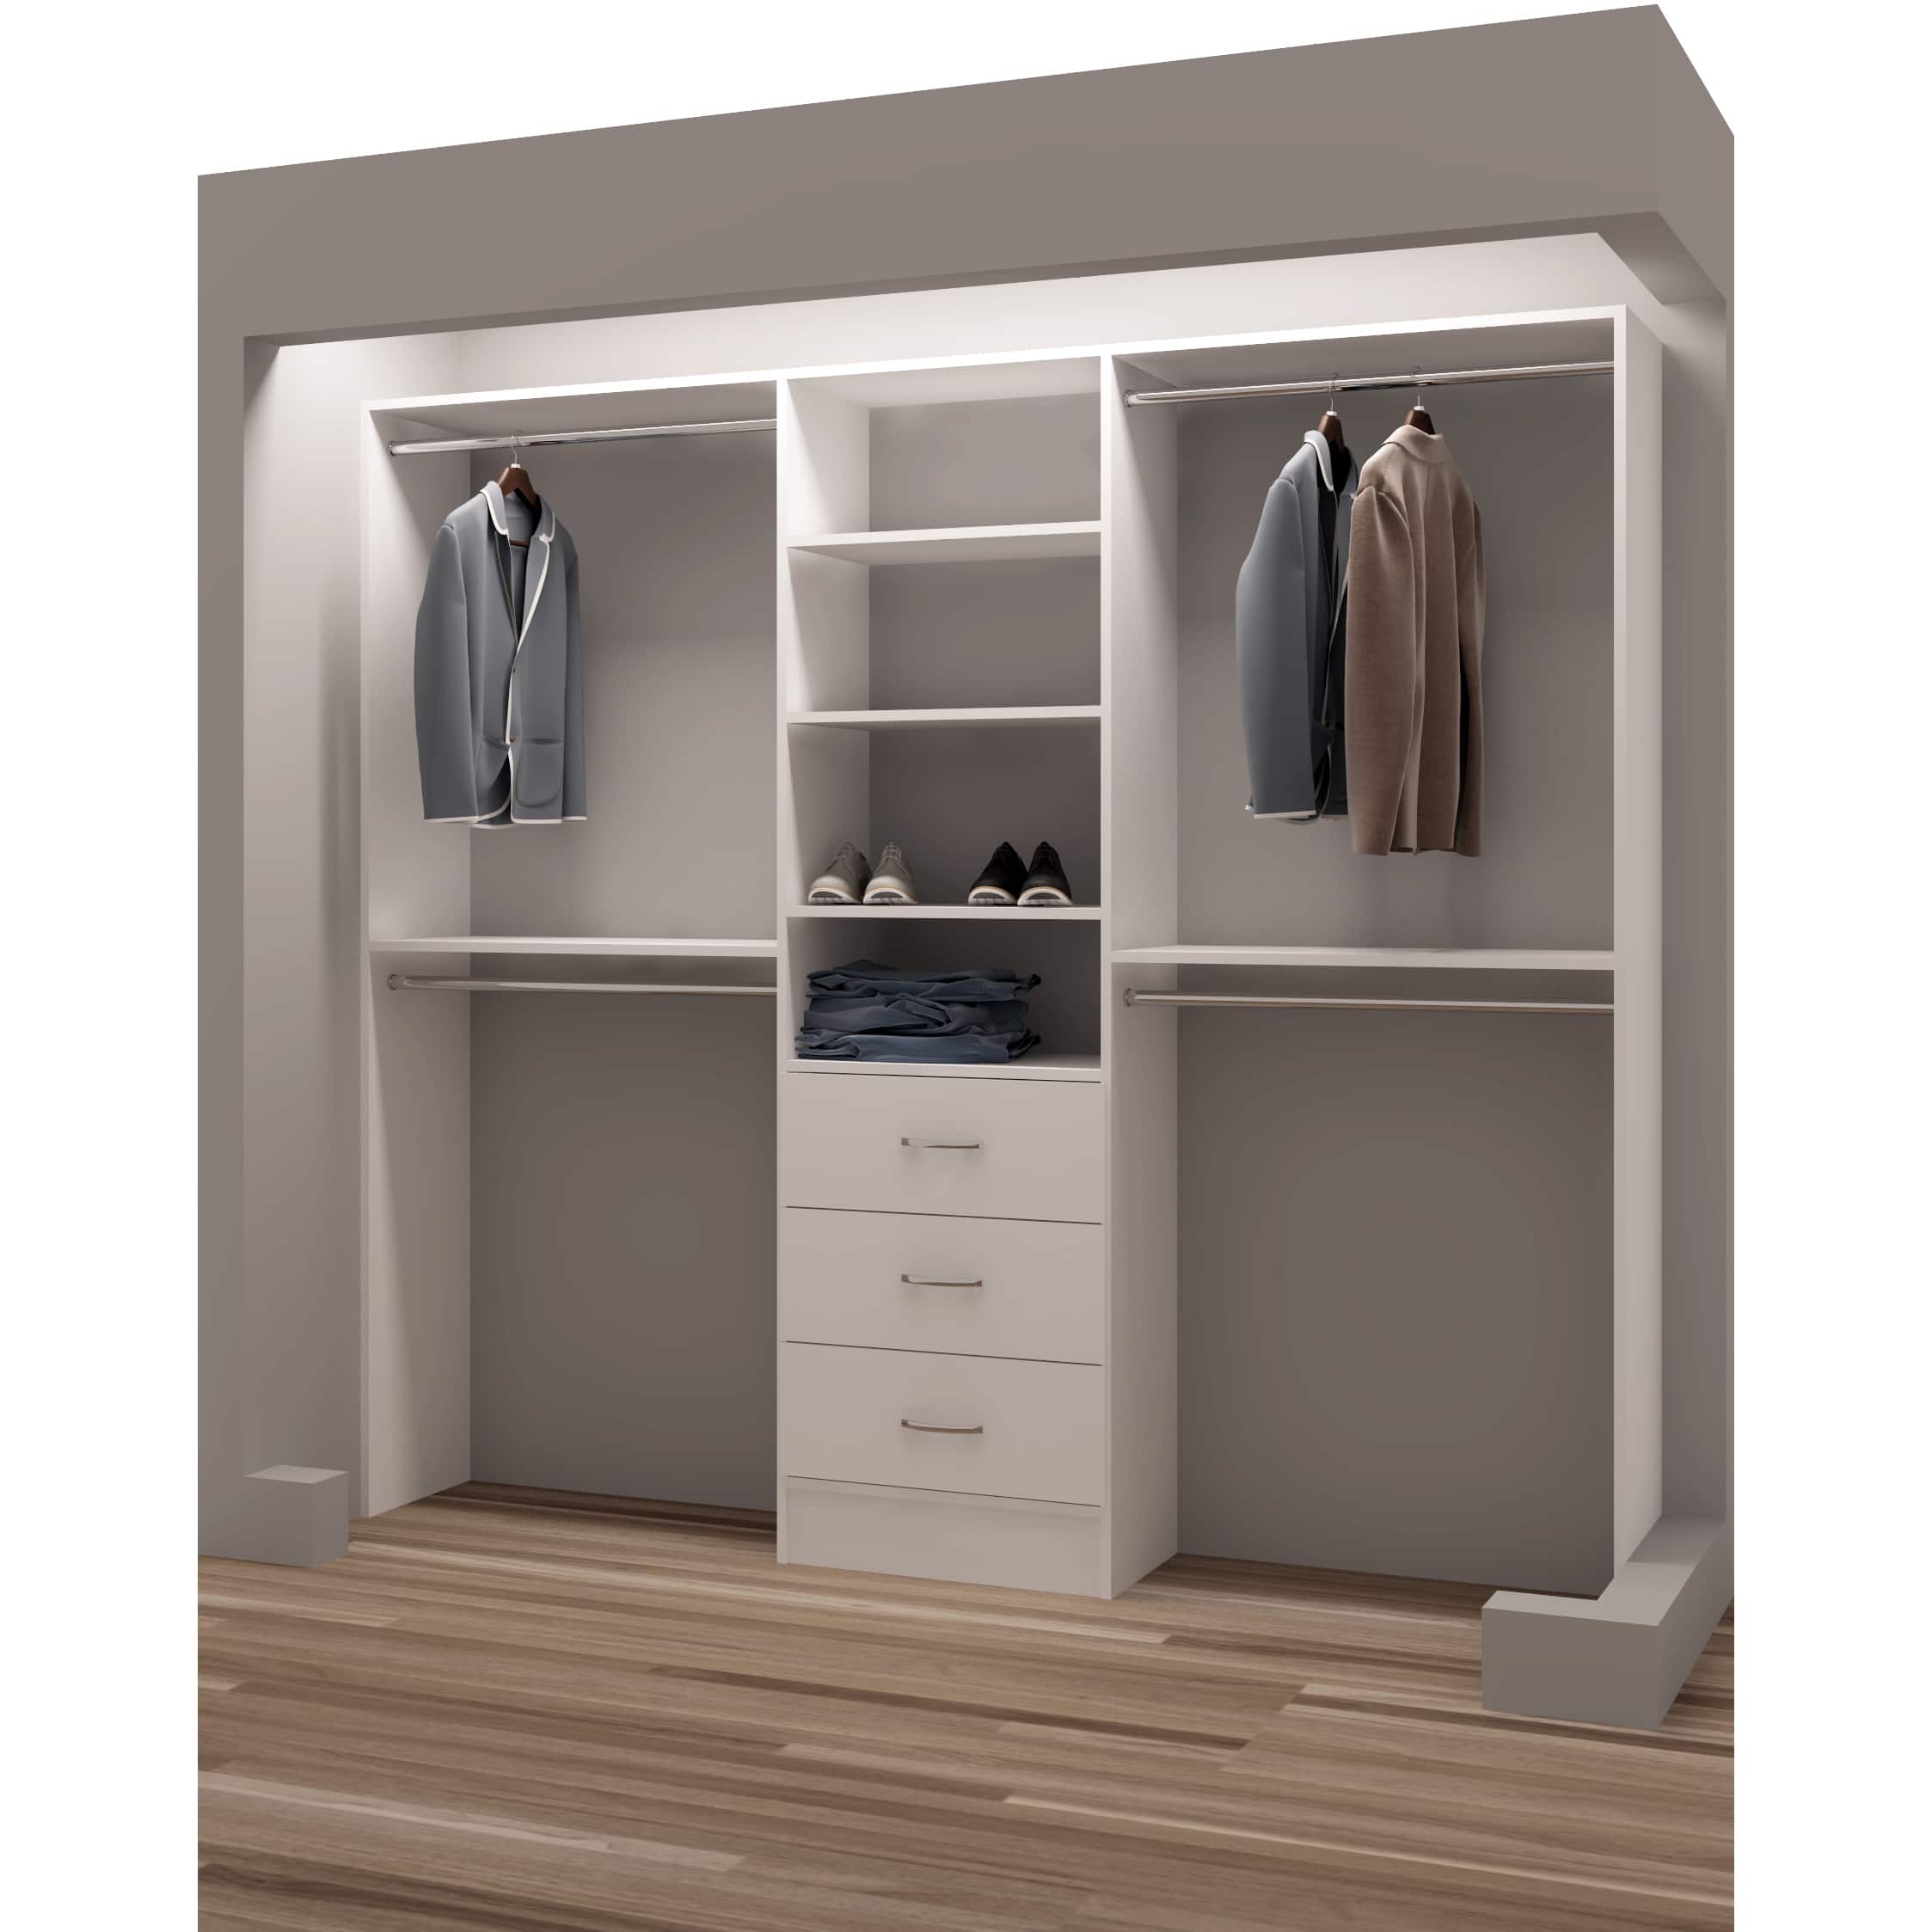 Buy Closet Organizers & Systems Online at